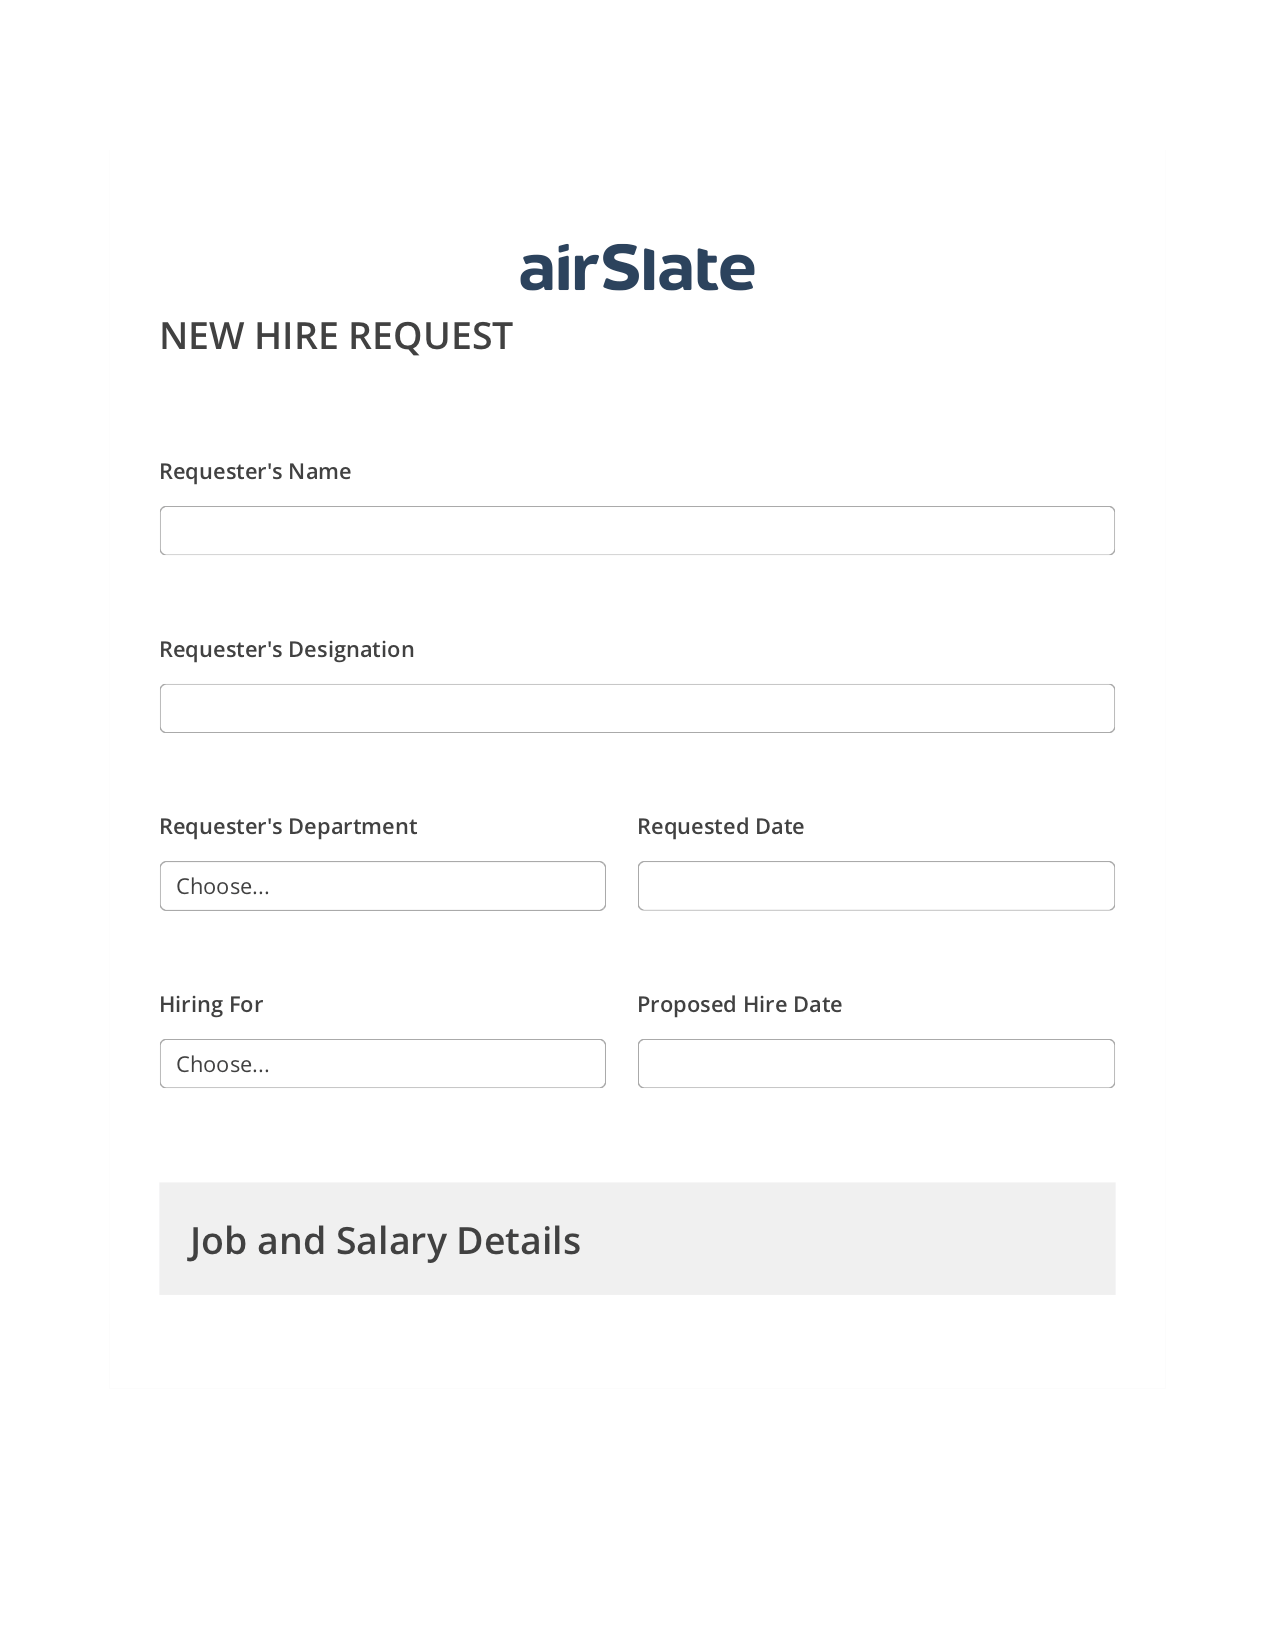 Hiring Request Workflow Pre-fill Dropdowns from Smartsheet Bot, Create slate from another Flow Bot, Export to Excel 365 Bot